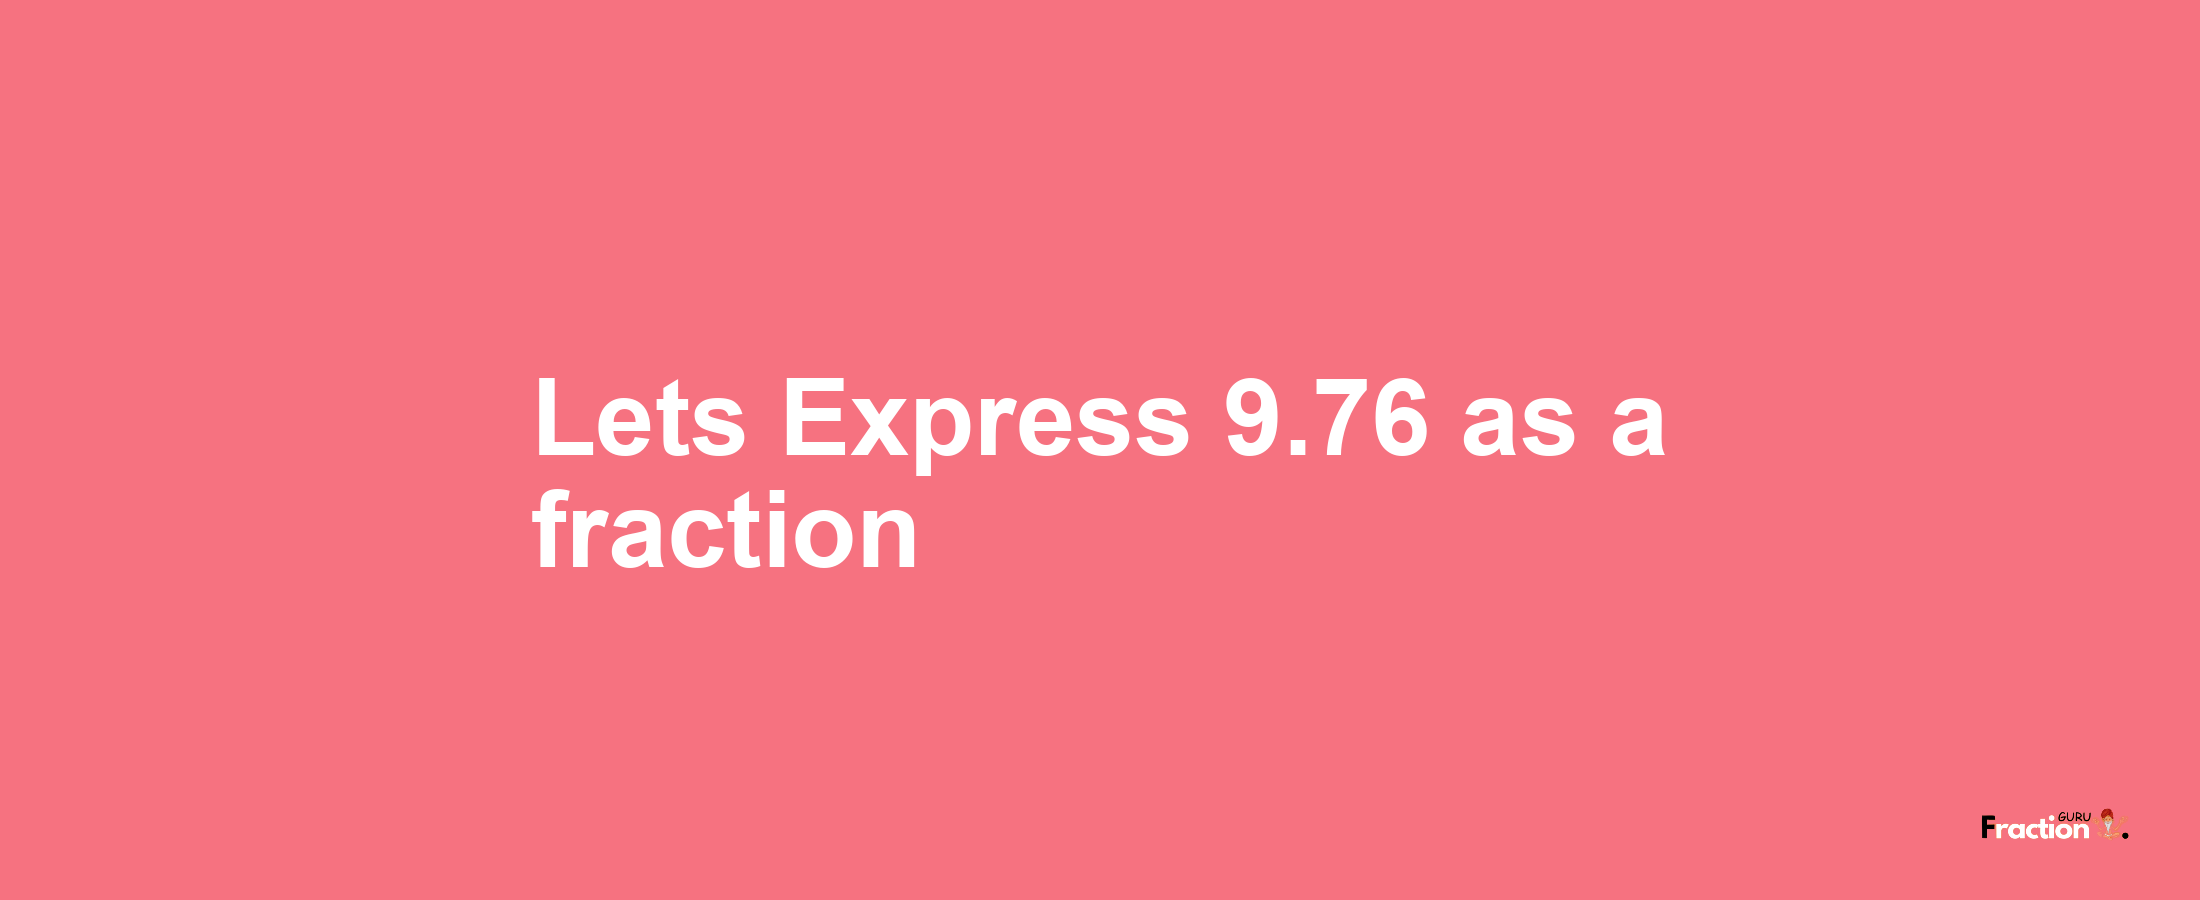 Lets Express 9.76 as afraction